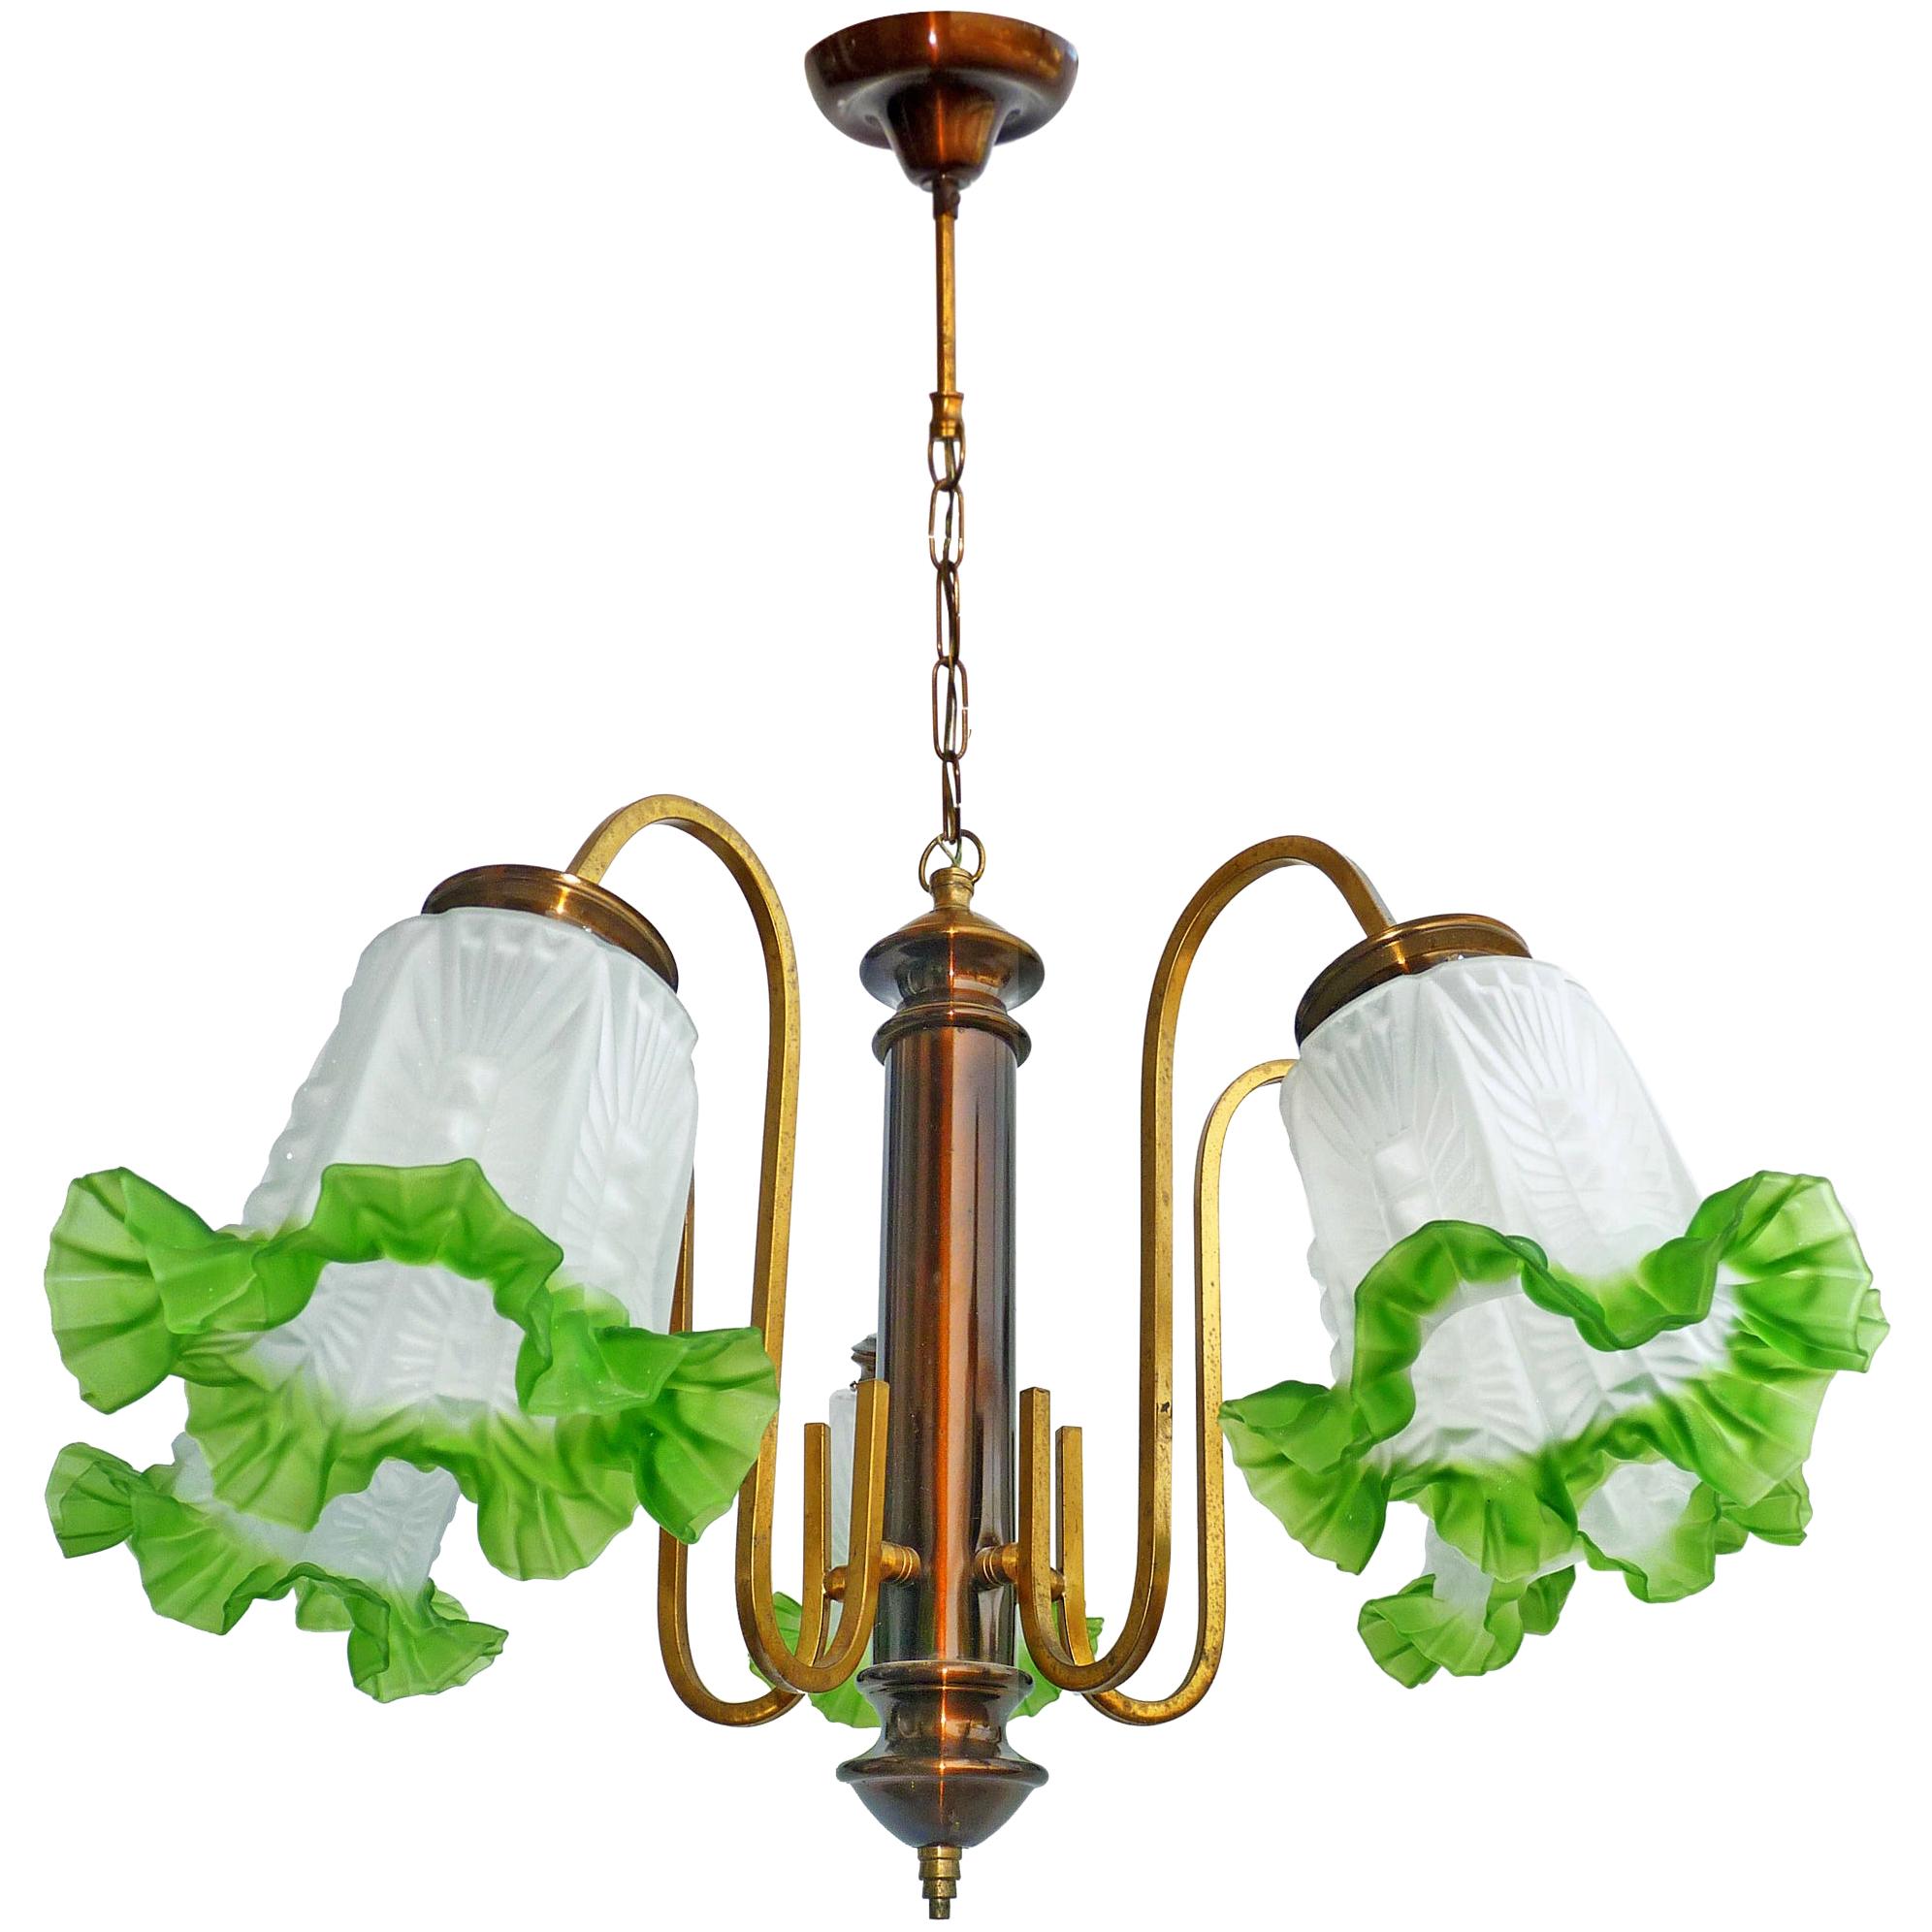 French Art Deco Chandelier in Brass, Copper & Frosted Green Glass 5-Light Shades